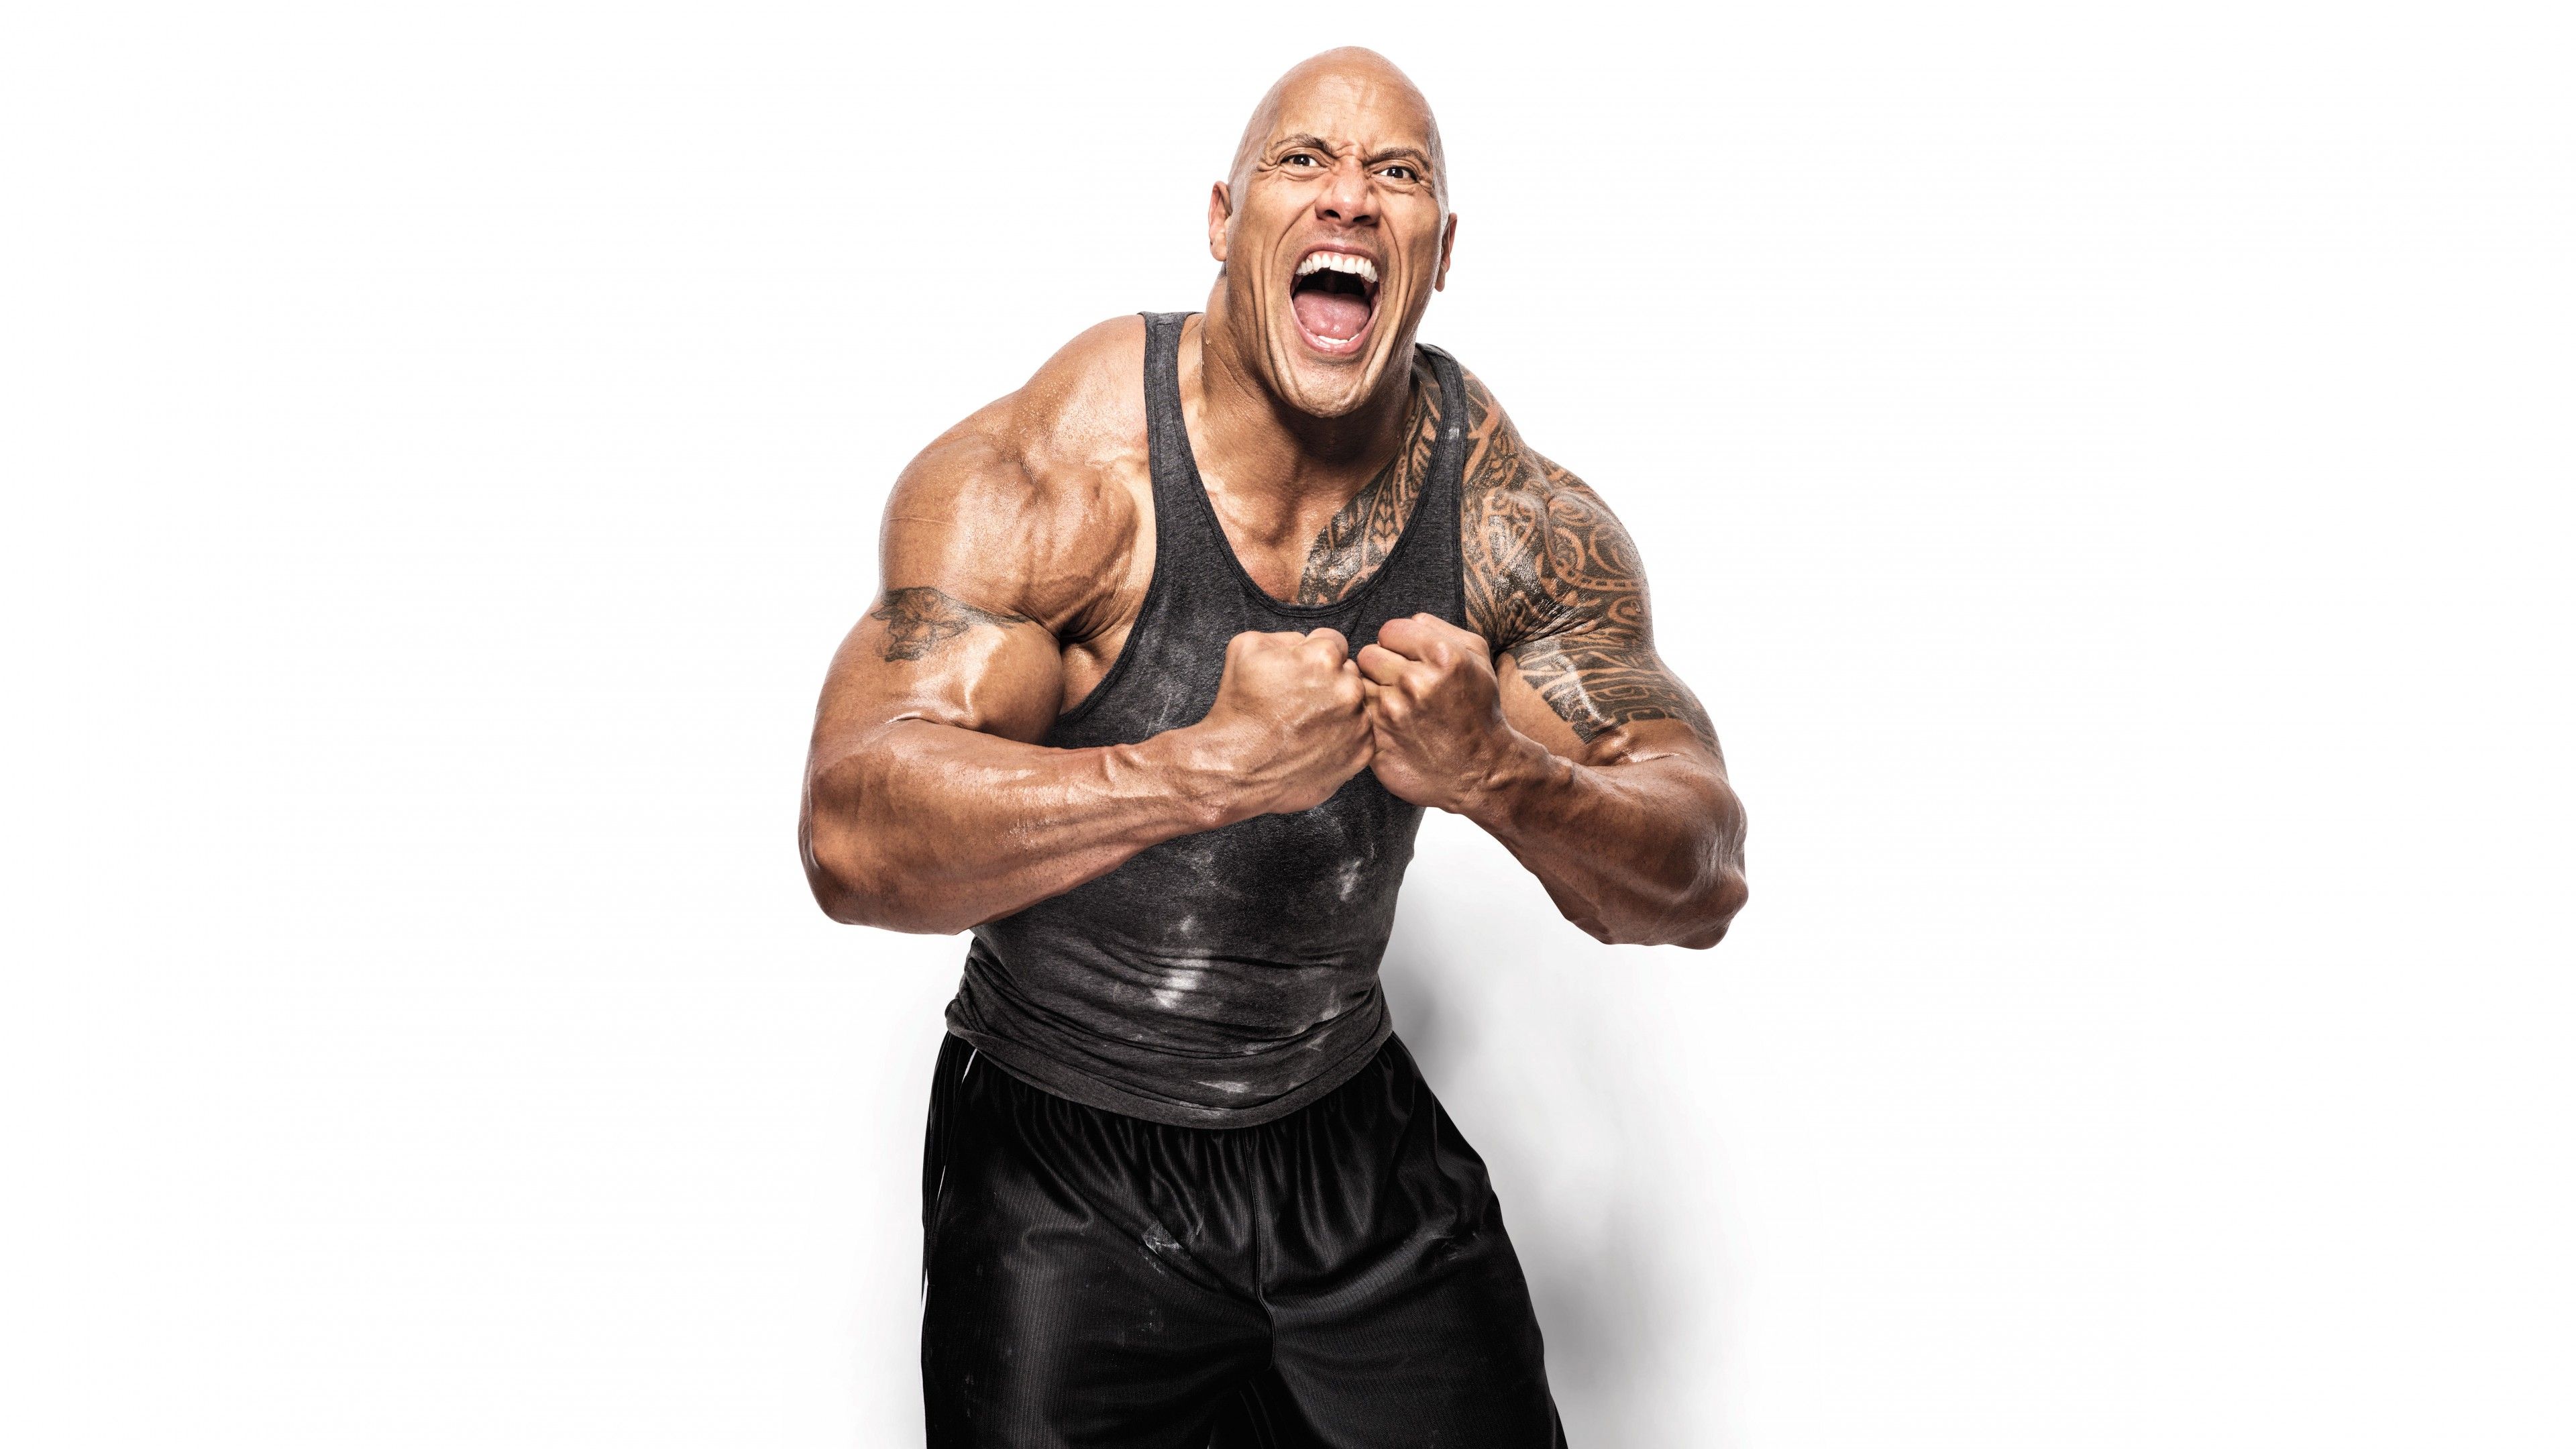 Pin by Nabil on Fit T choice  The rock dwayne johnson workout The rock  dwayne johnson The rock workout